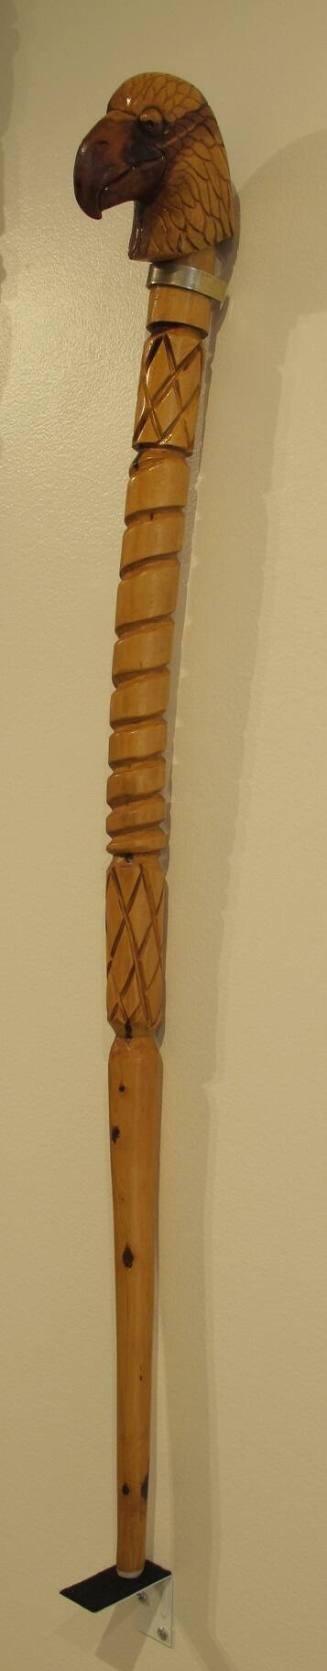 A carved walking stick with an eagle's head and alternating patterns of diamonds and spirals. 